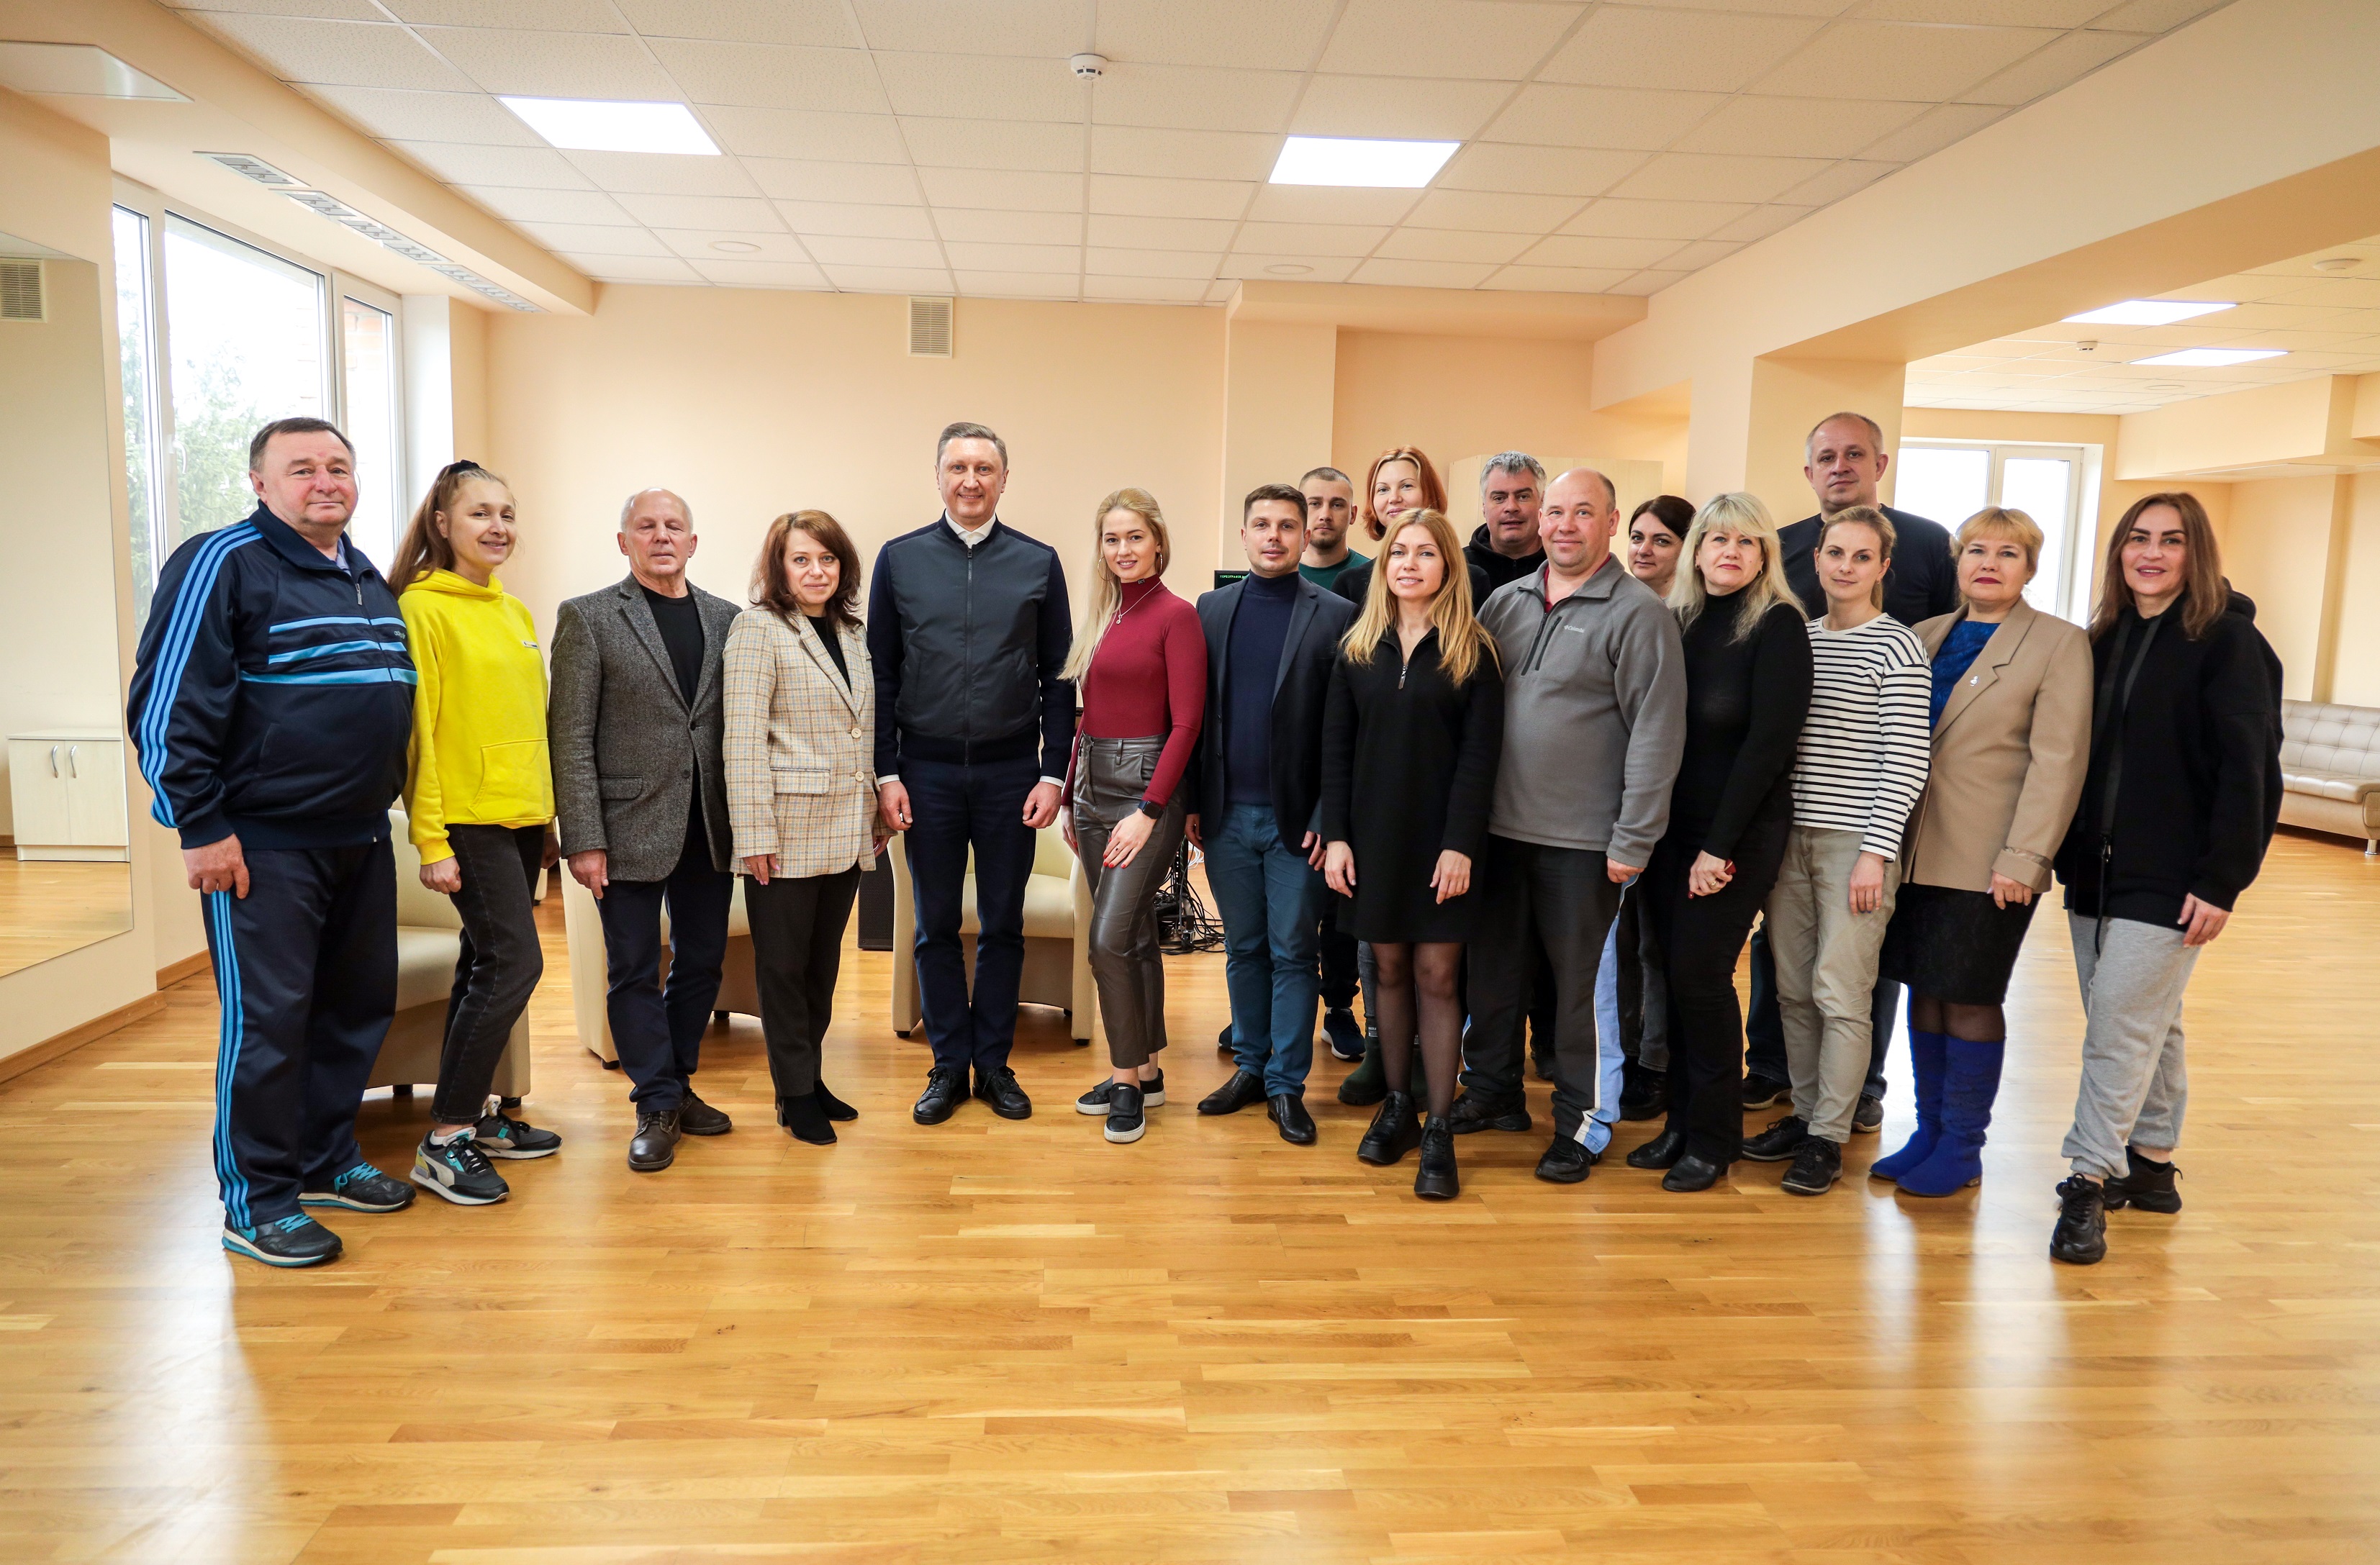 The Department of Choreography and Sports Types of Dance is opened at the university